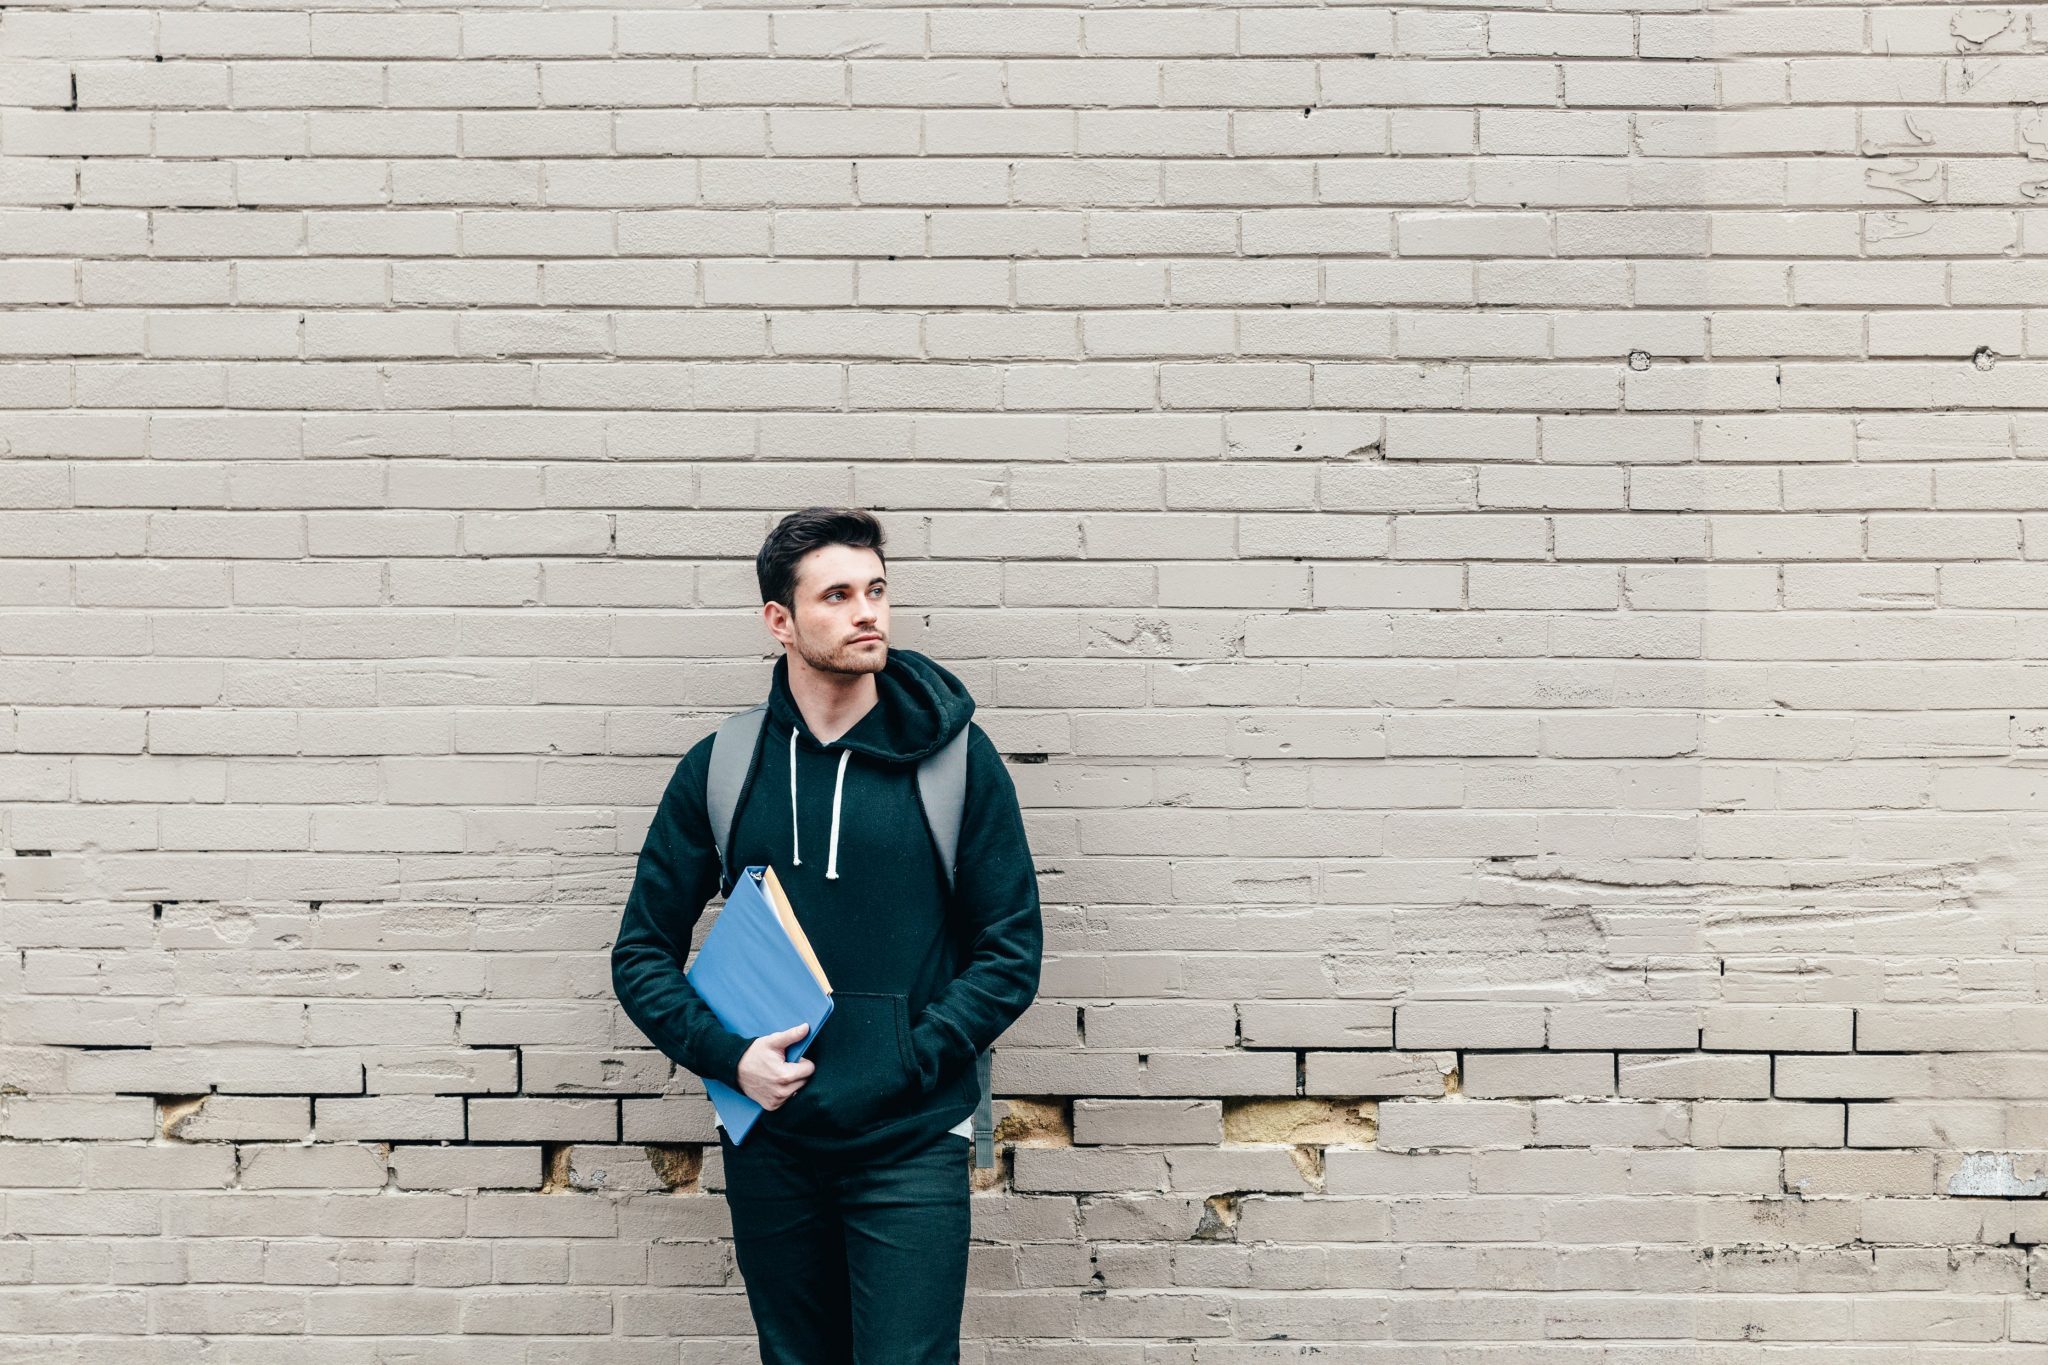 Male student leaning against a brick wall holding textbooks